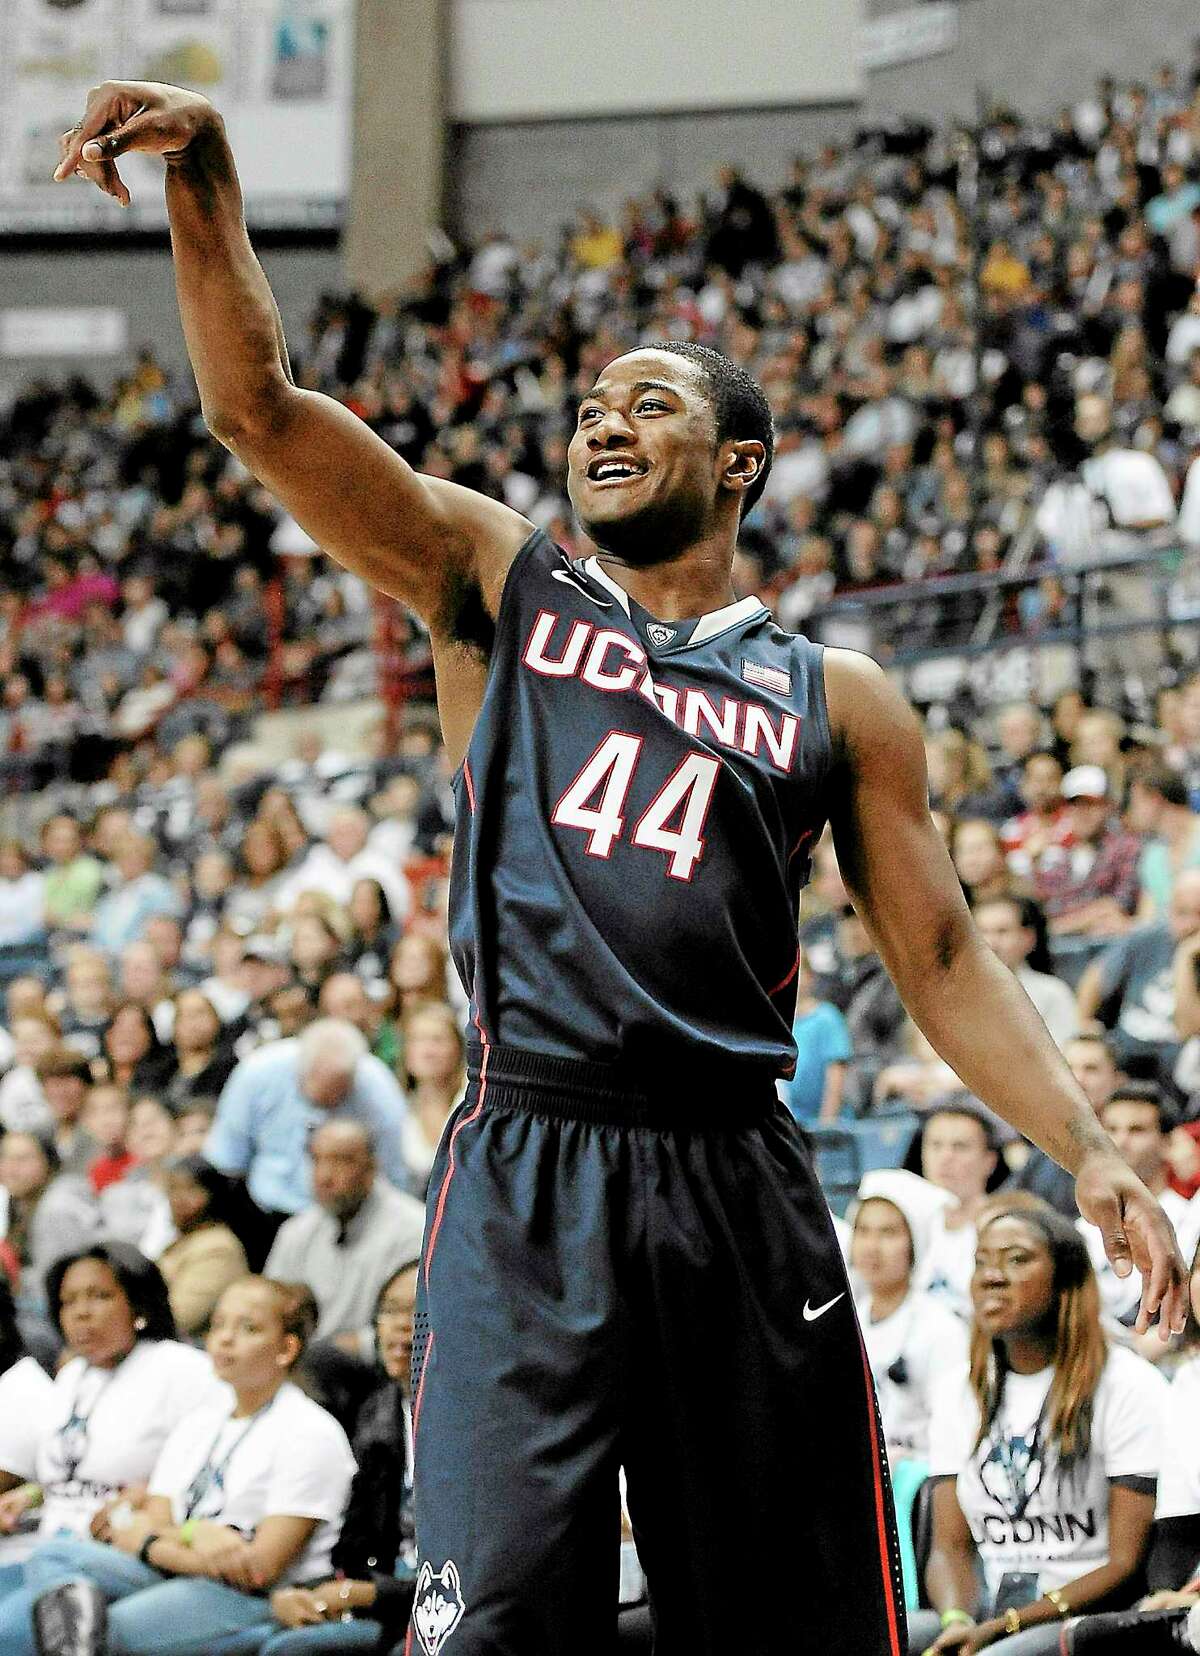 UConn redshirt sophomore Rodney Purvis is suspended for Friday’s season opener vs. Bryant after playing in more than one summer league this year.